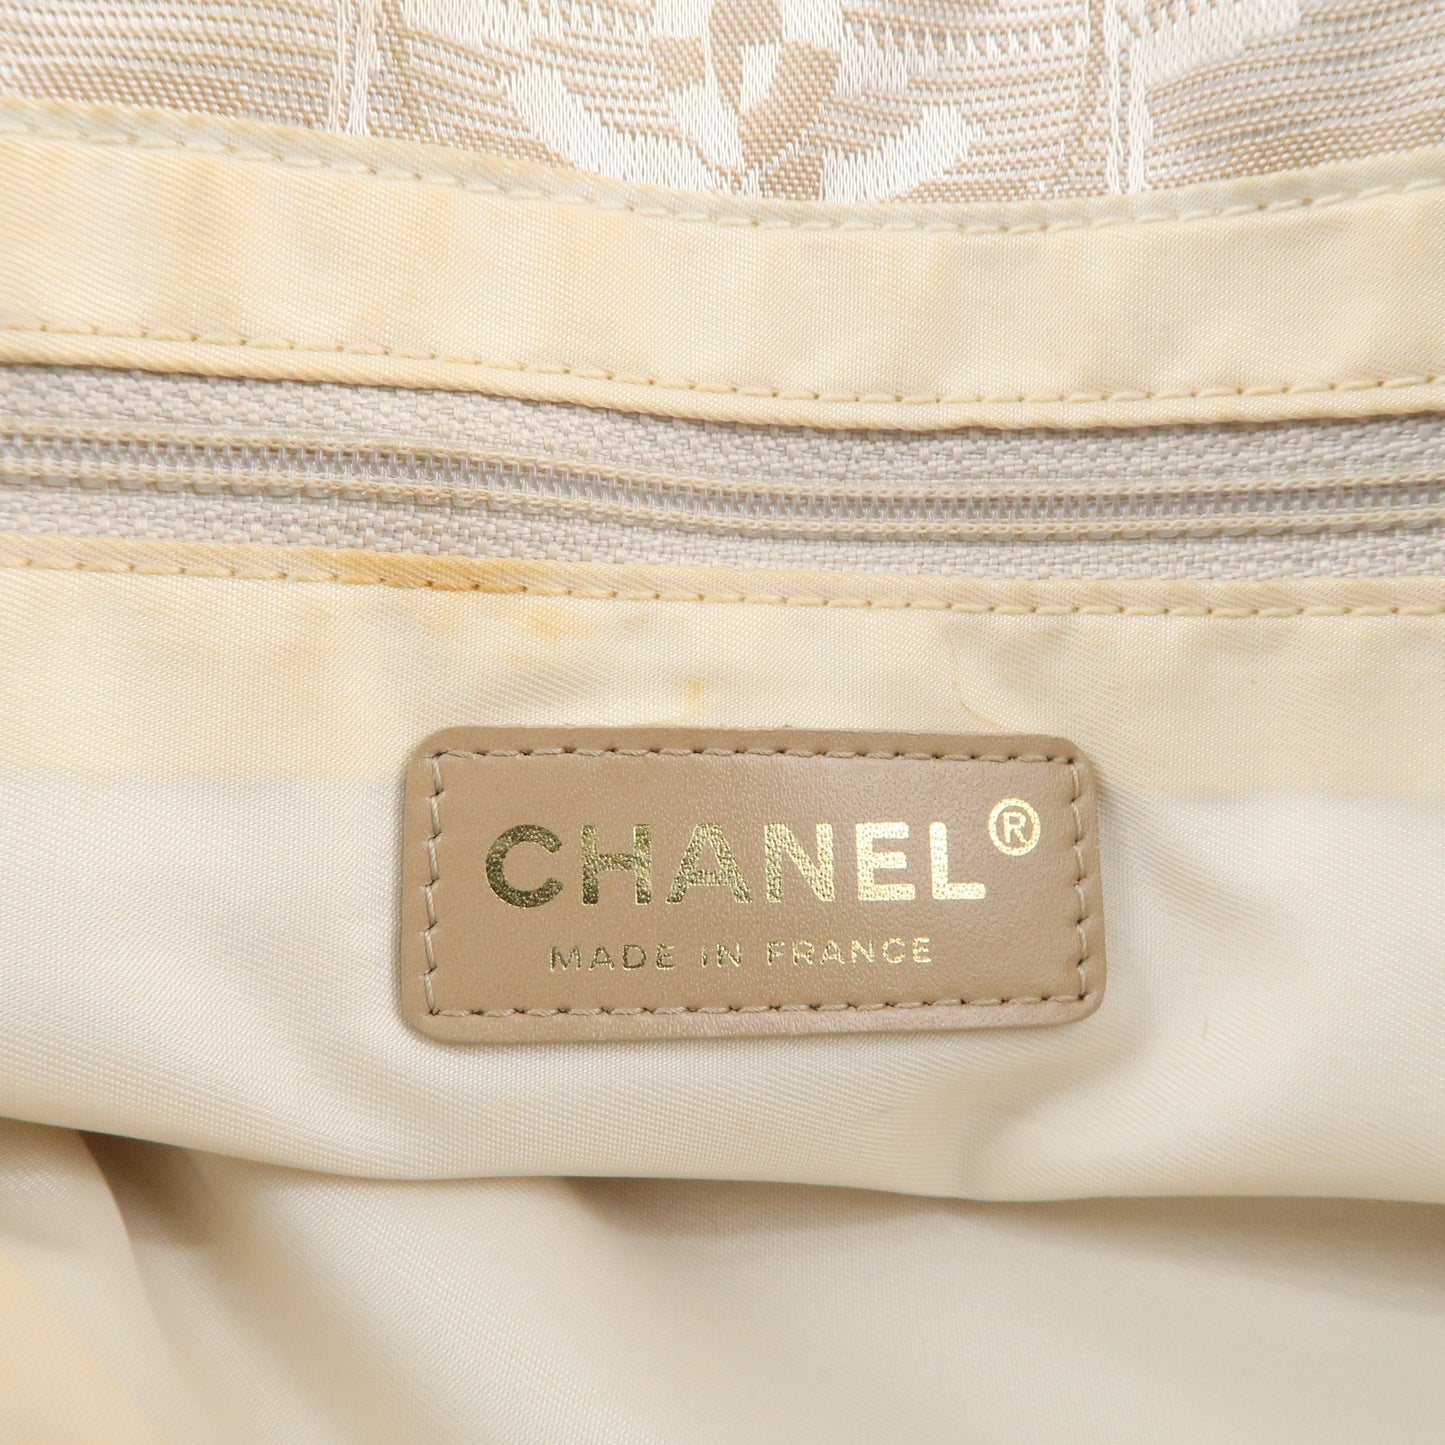 CHANEL New Travel Line Nylon Jacquard Leather Tote PM Beige A20457